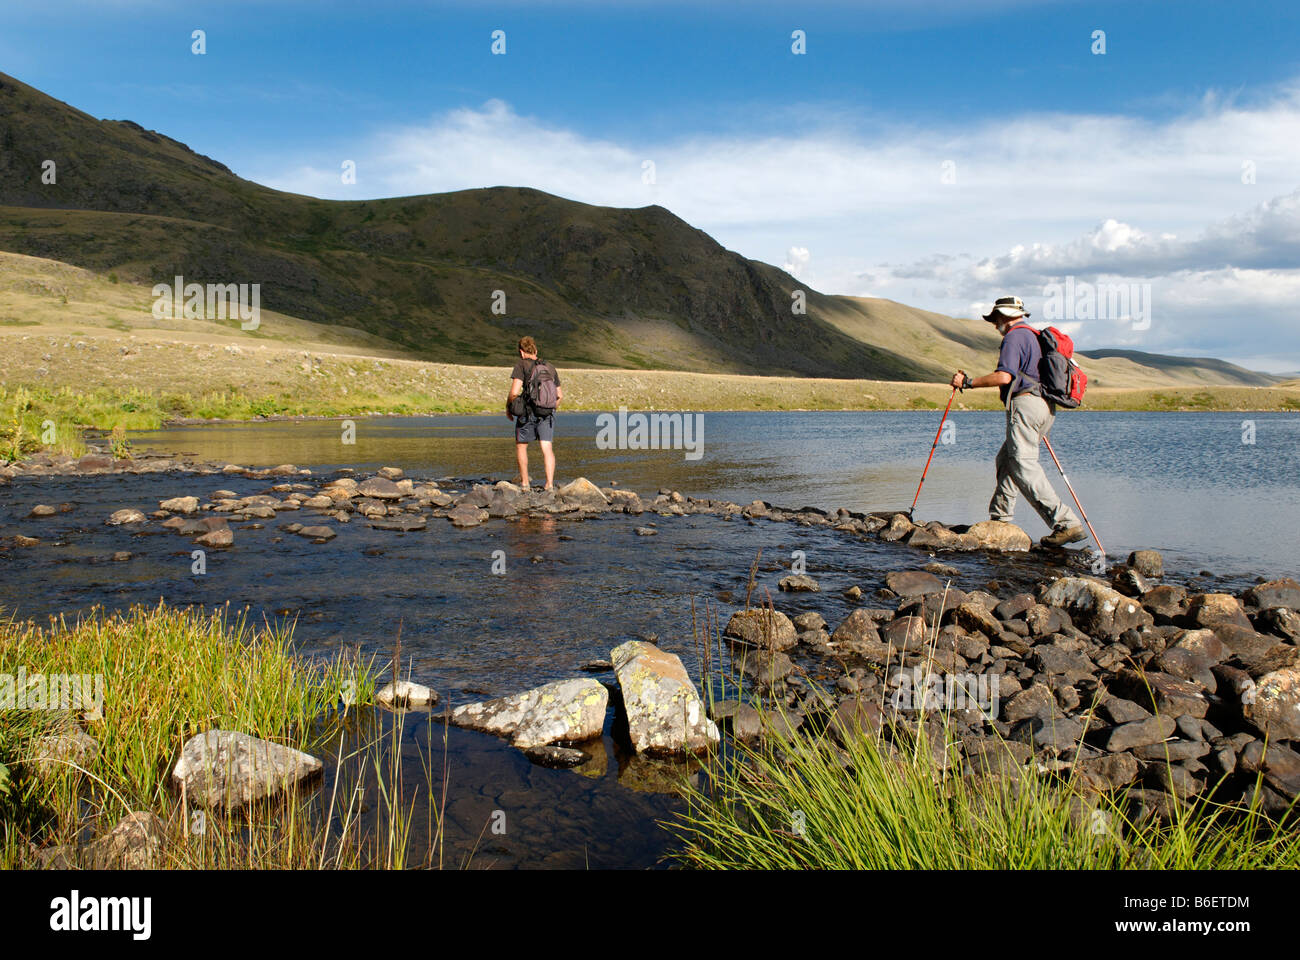 Hikers, trekkers crossing a river, Saylyugem Mountains, Tschuja Steppes, Altai Republic, Siberia, Russia, Asia Stock Photo